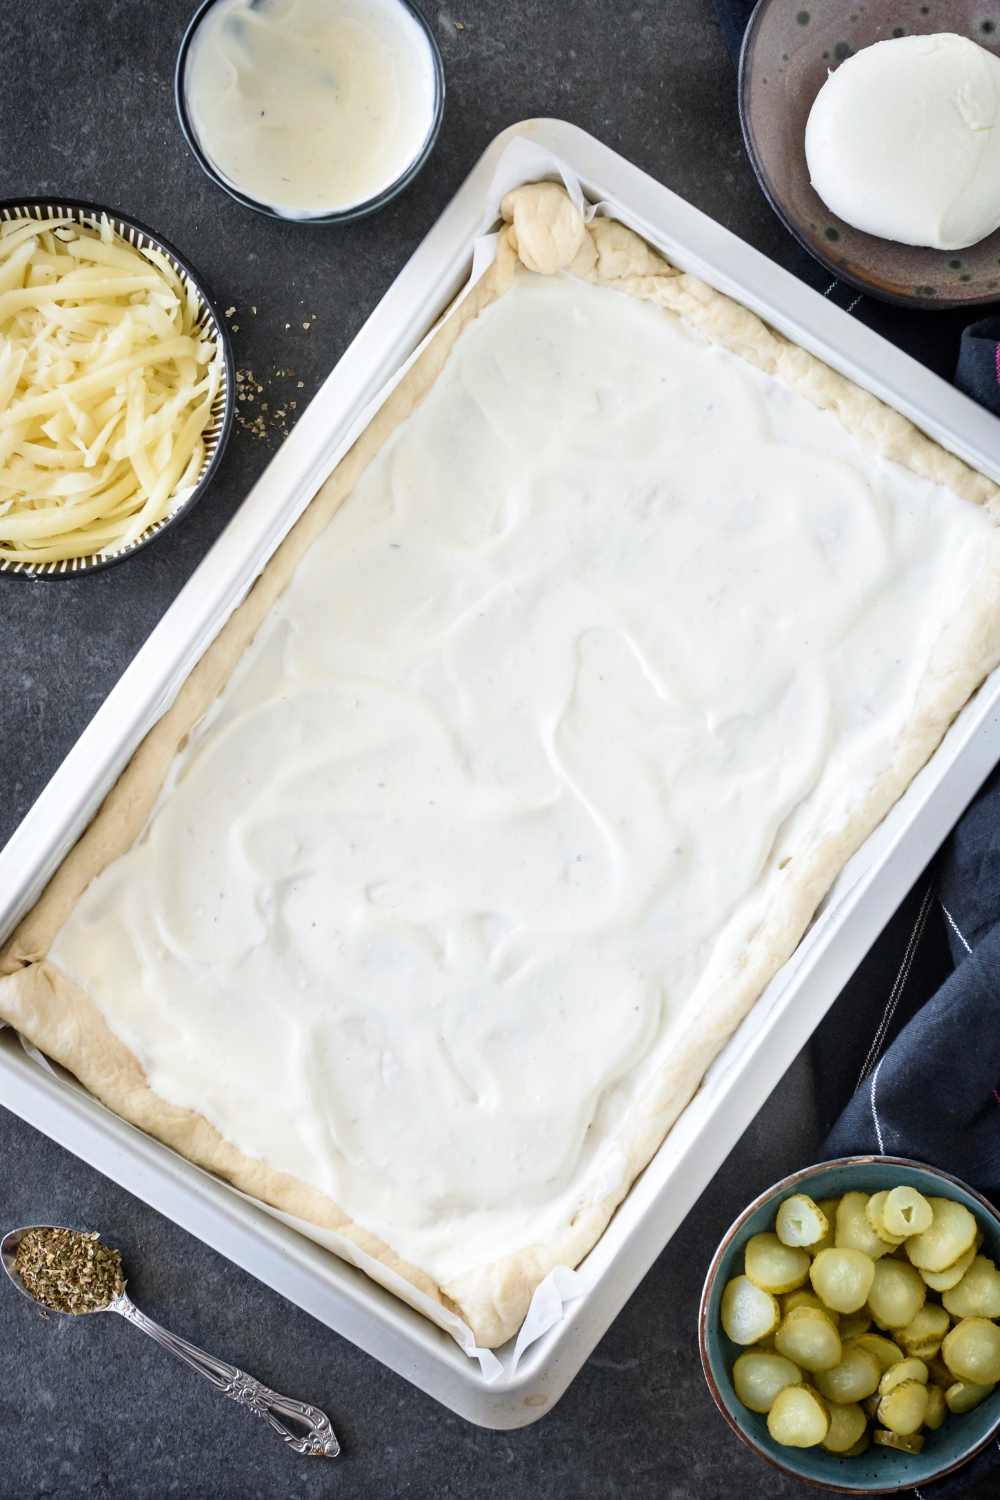 Pizza dough topped with white sauce on a baking sheet lined with parchment paper.